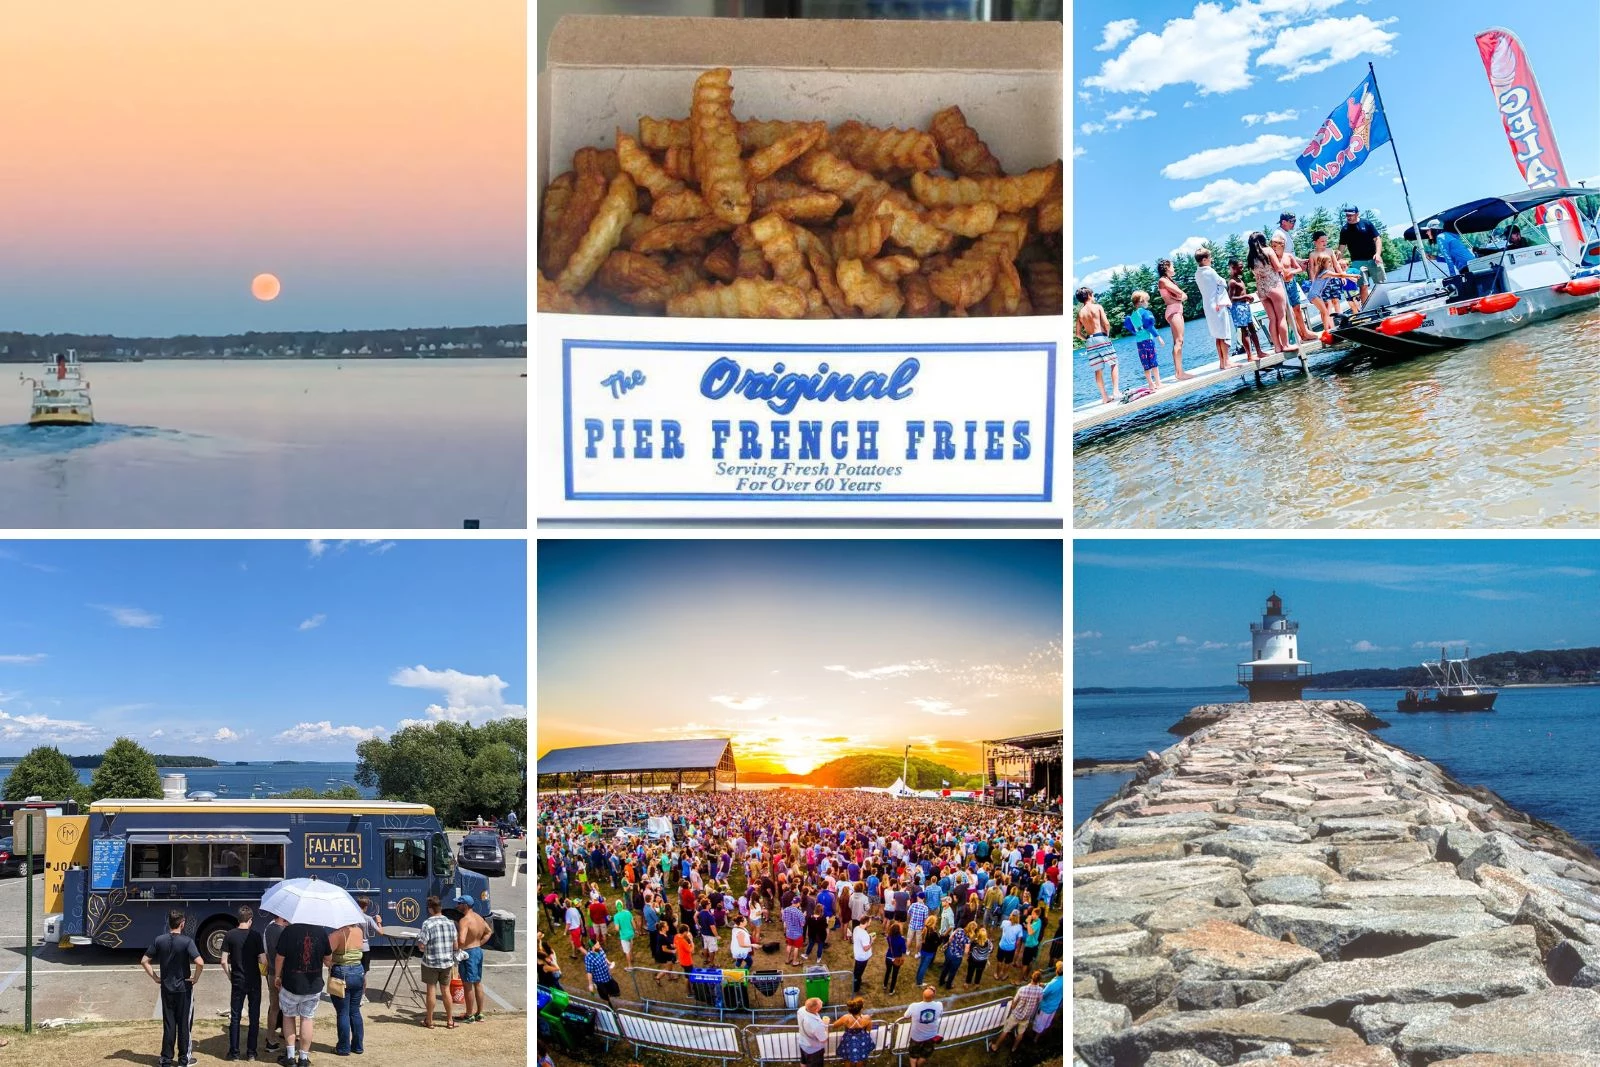 Heres 24 Experiences That Make Summer in Southern Maine Better pic